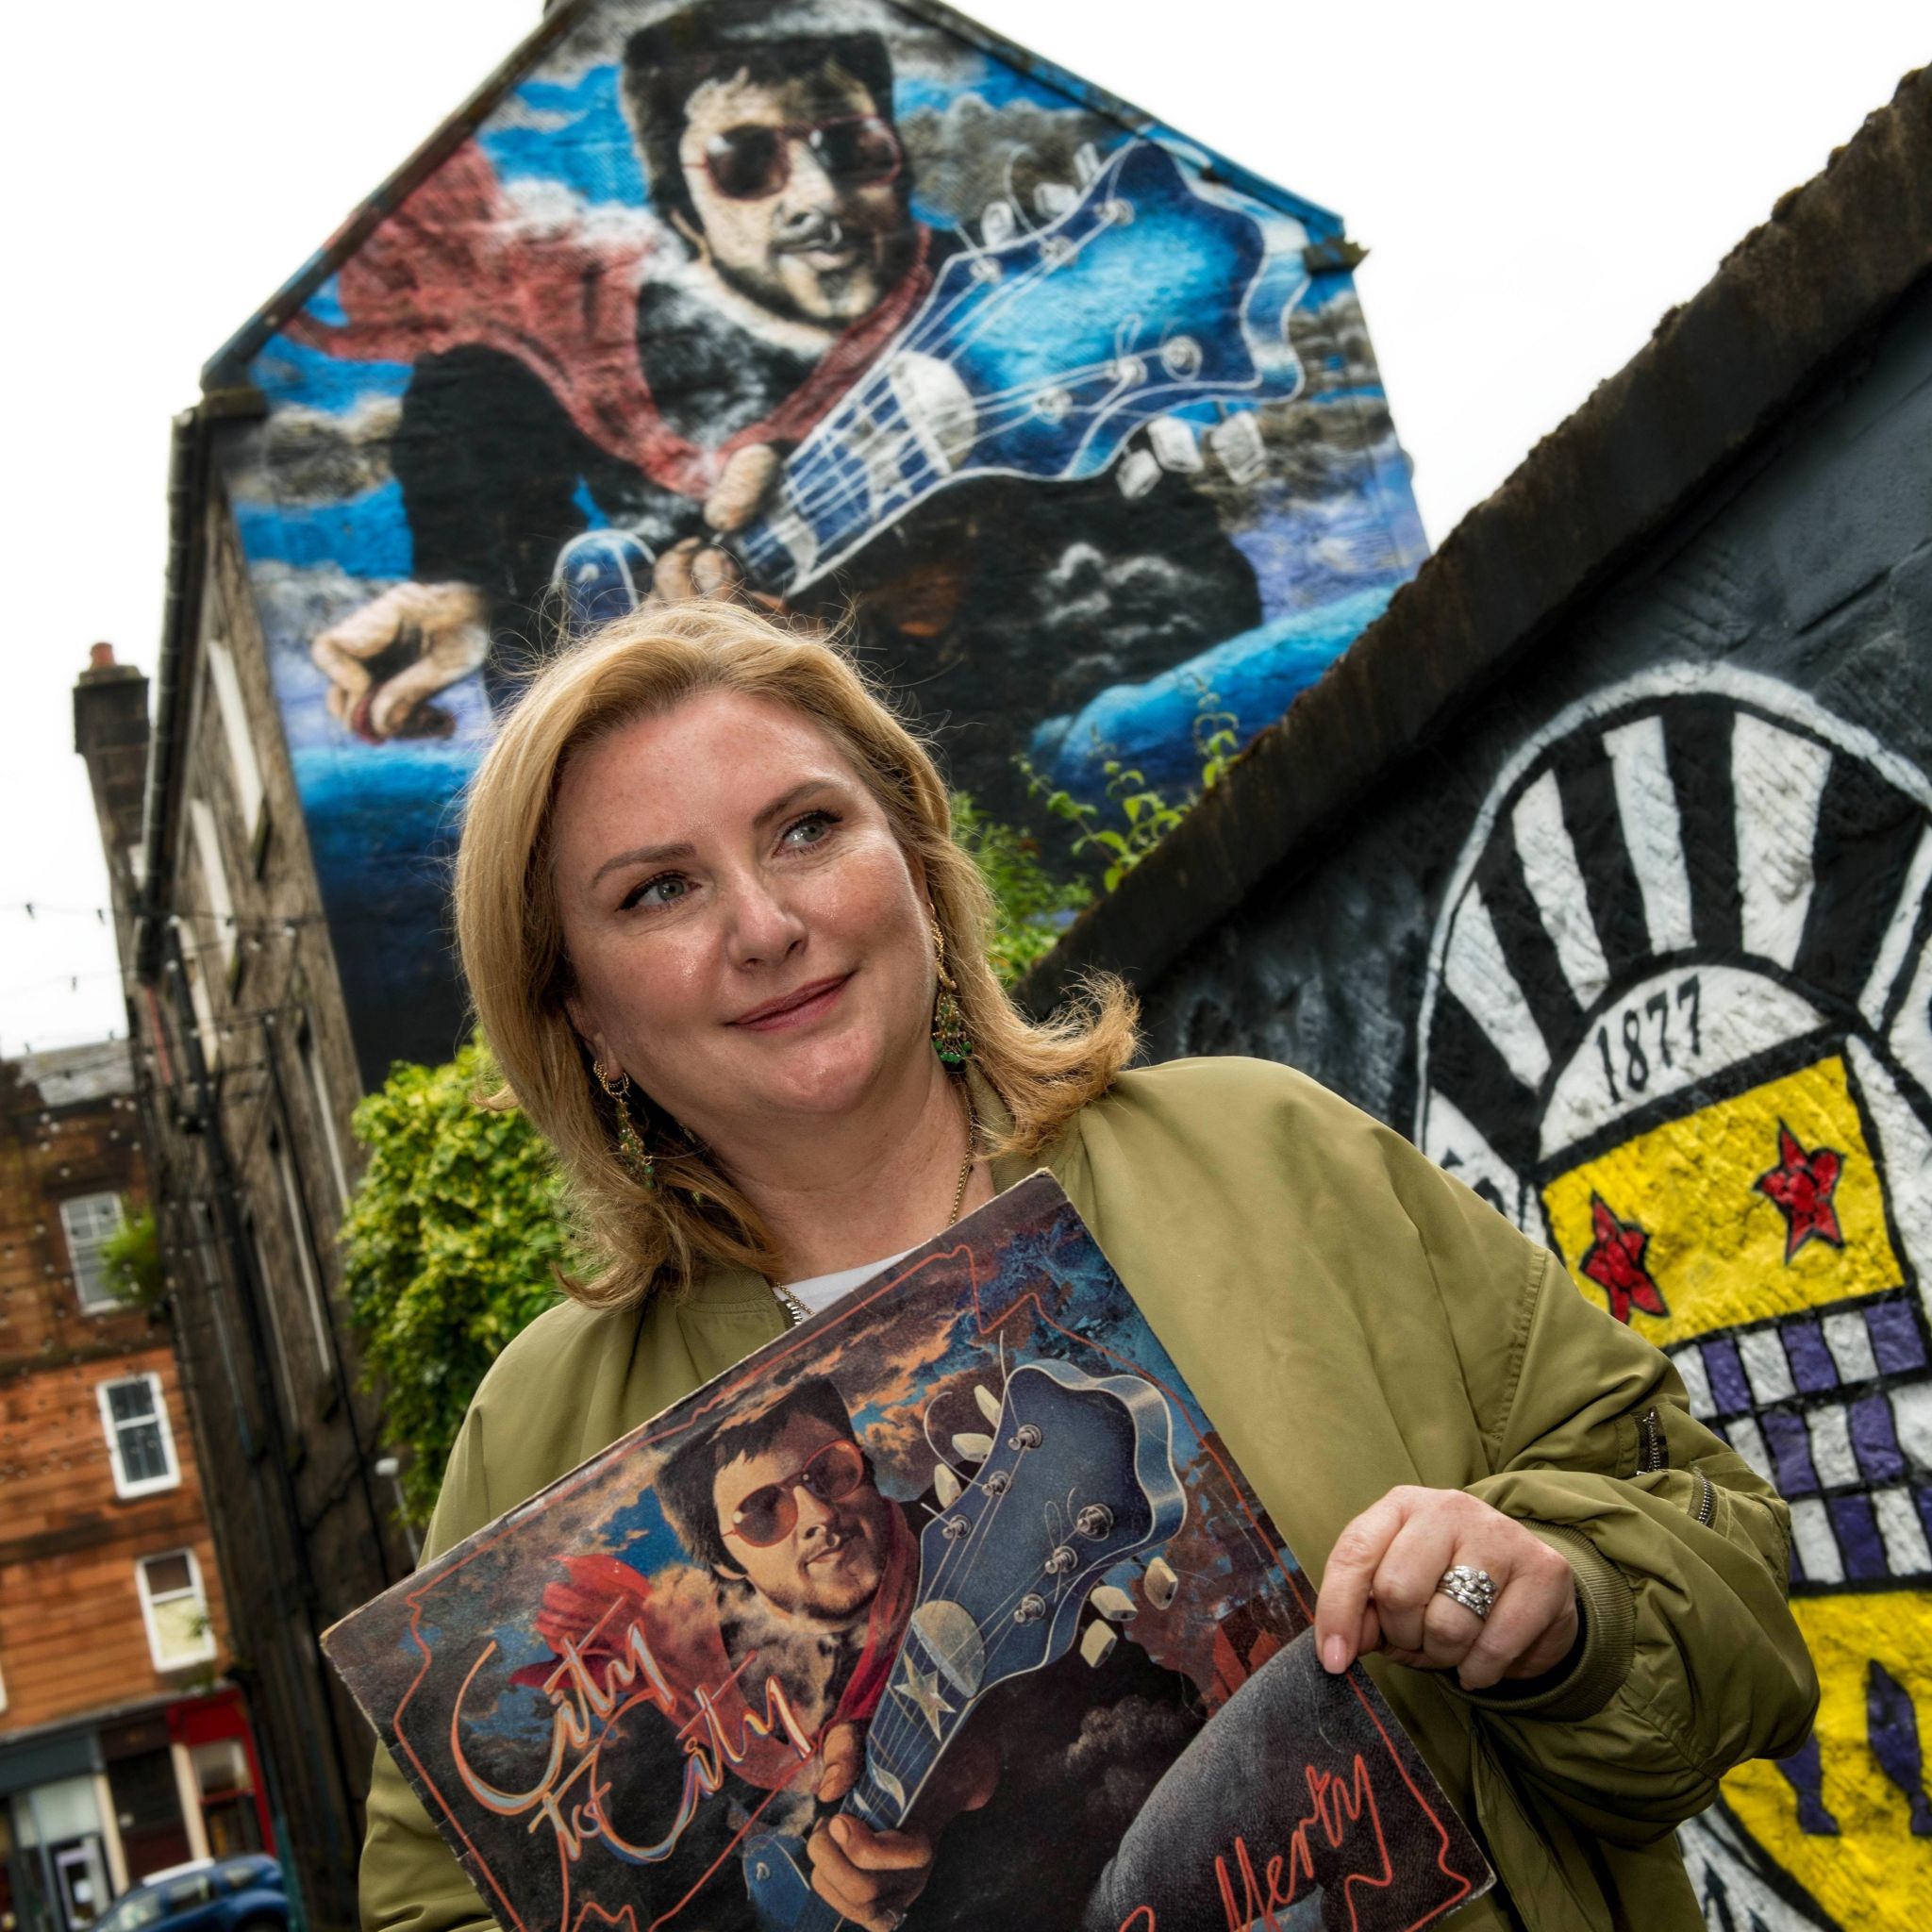 Martha Rafferty holding her dads album cover stood in front of a mural on side of building of same mural